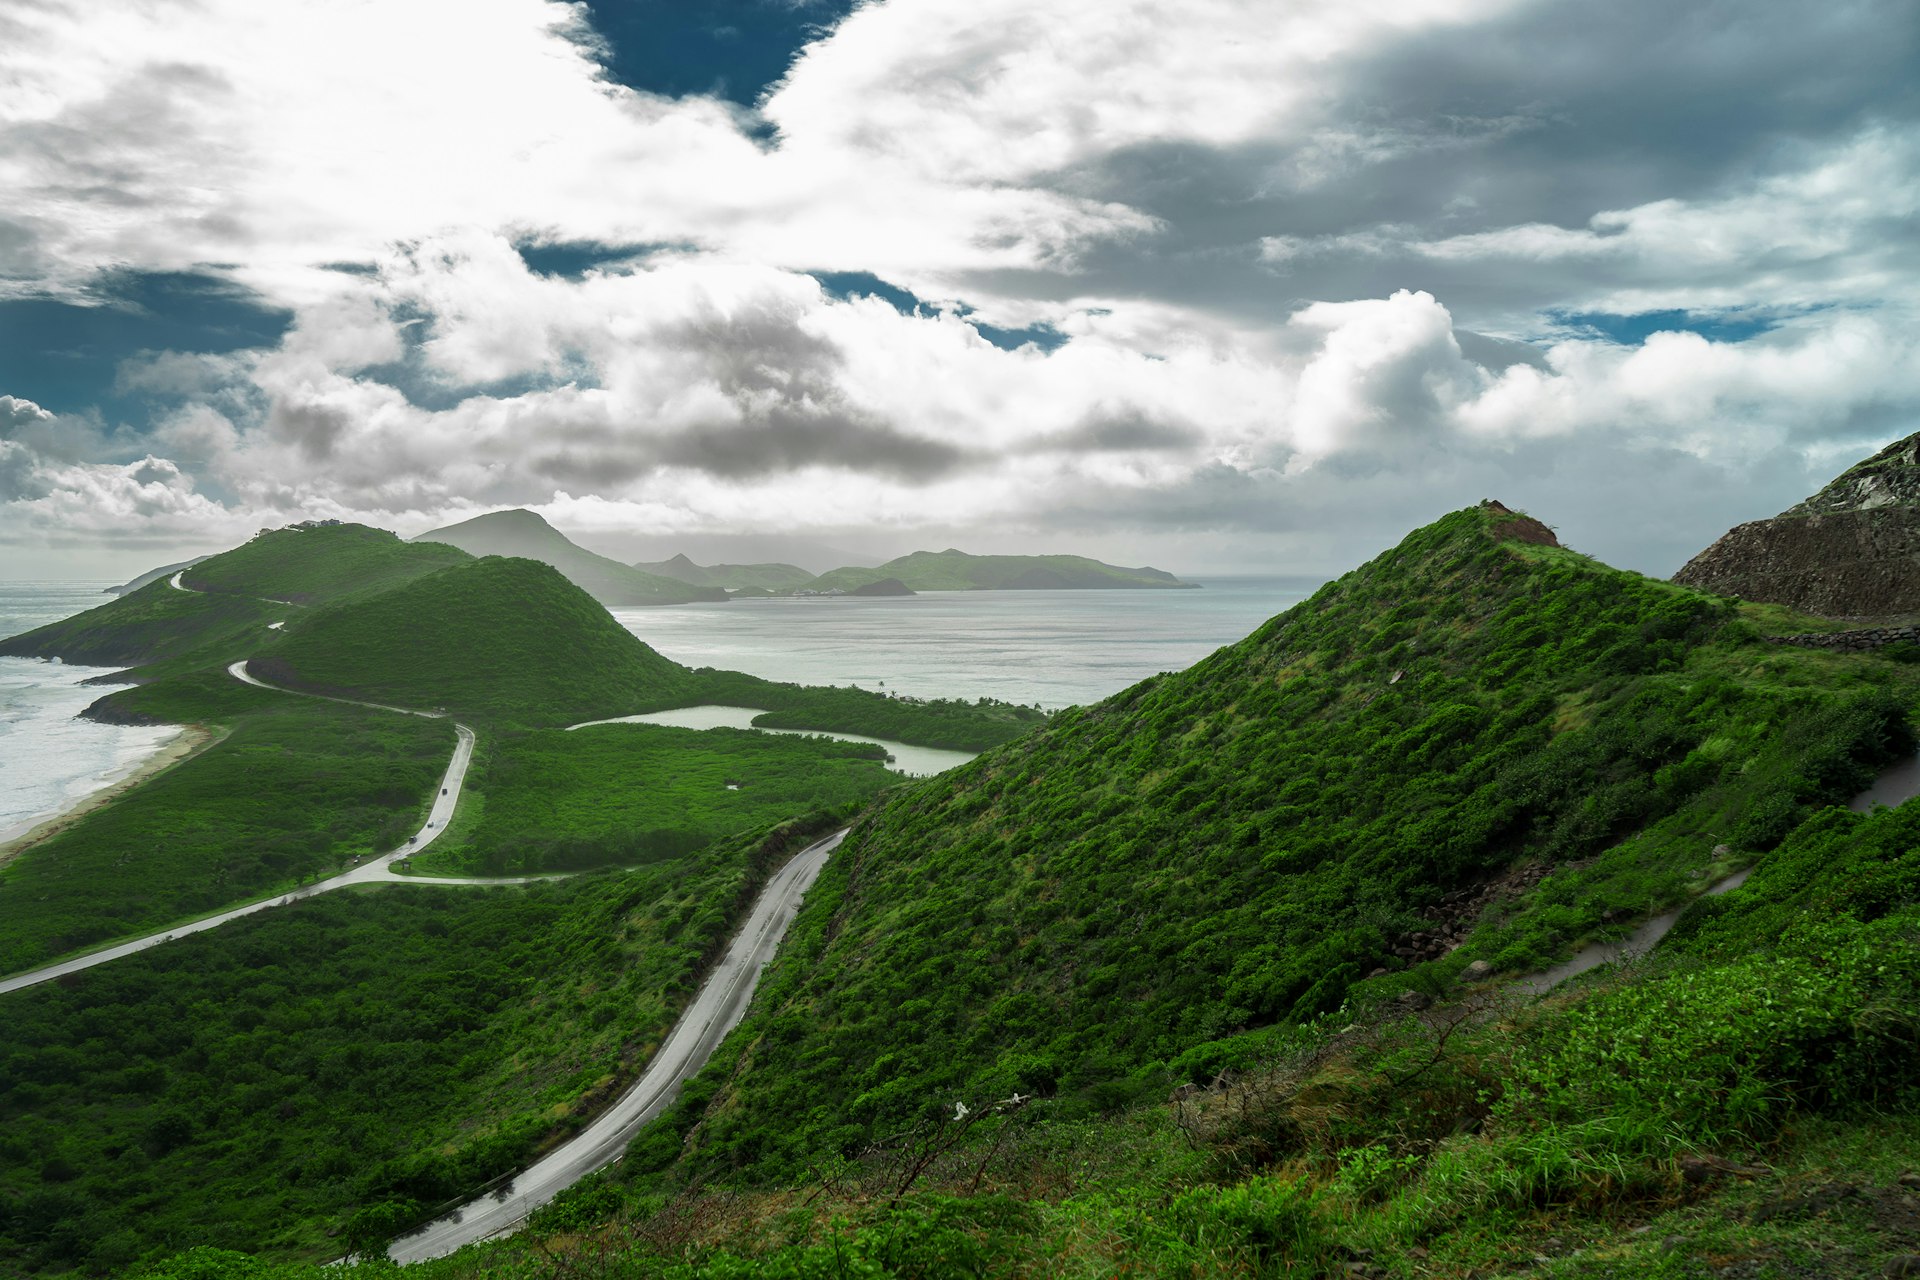 Landscape view of the Caribbean Sea and Atlantic Ocean looking south of St Kitts island from the top of Timothy Hill.